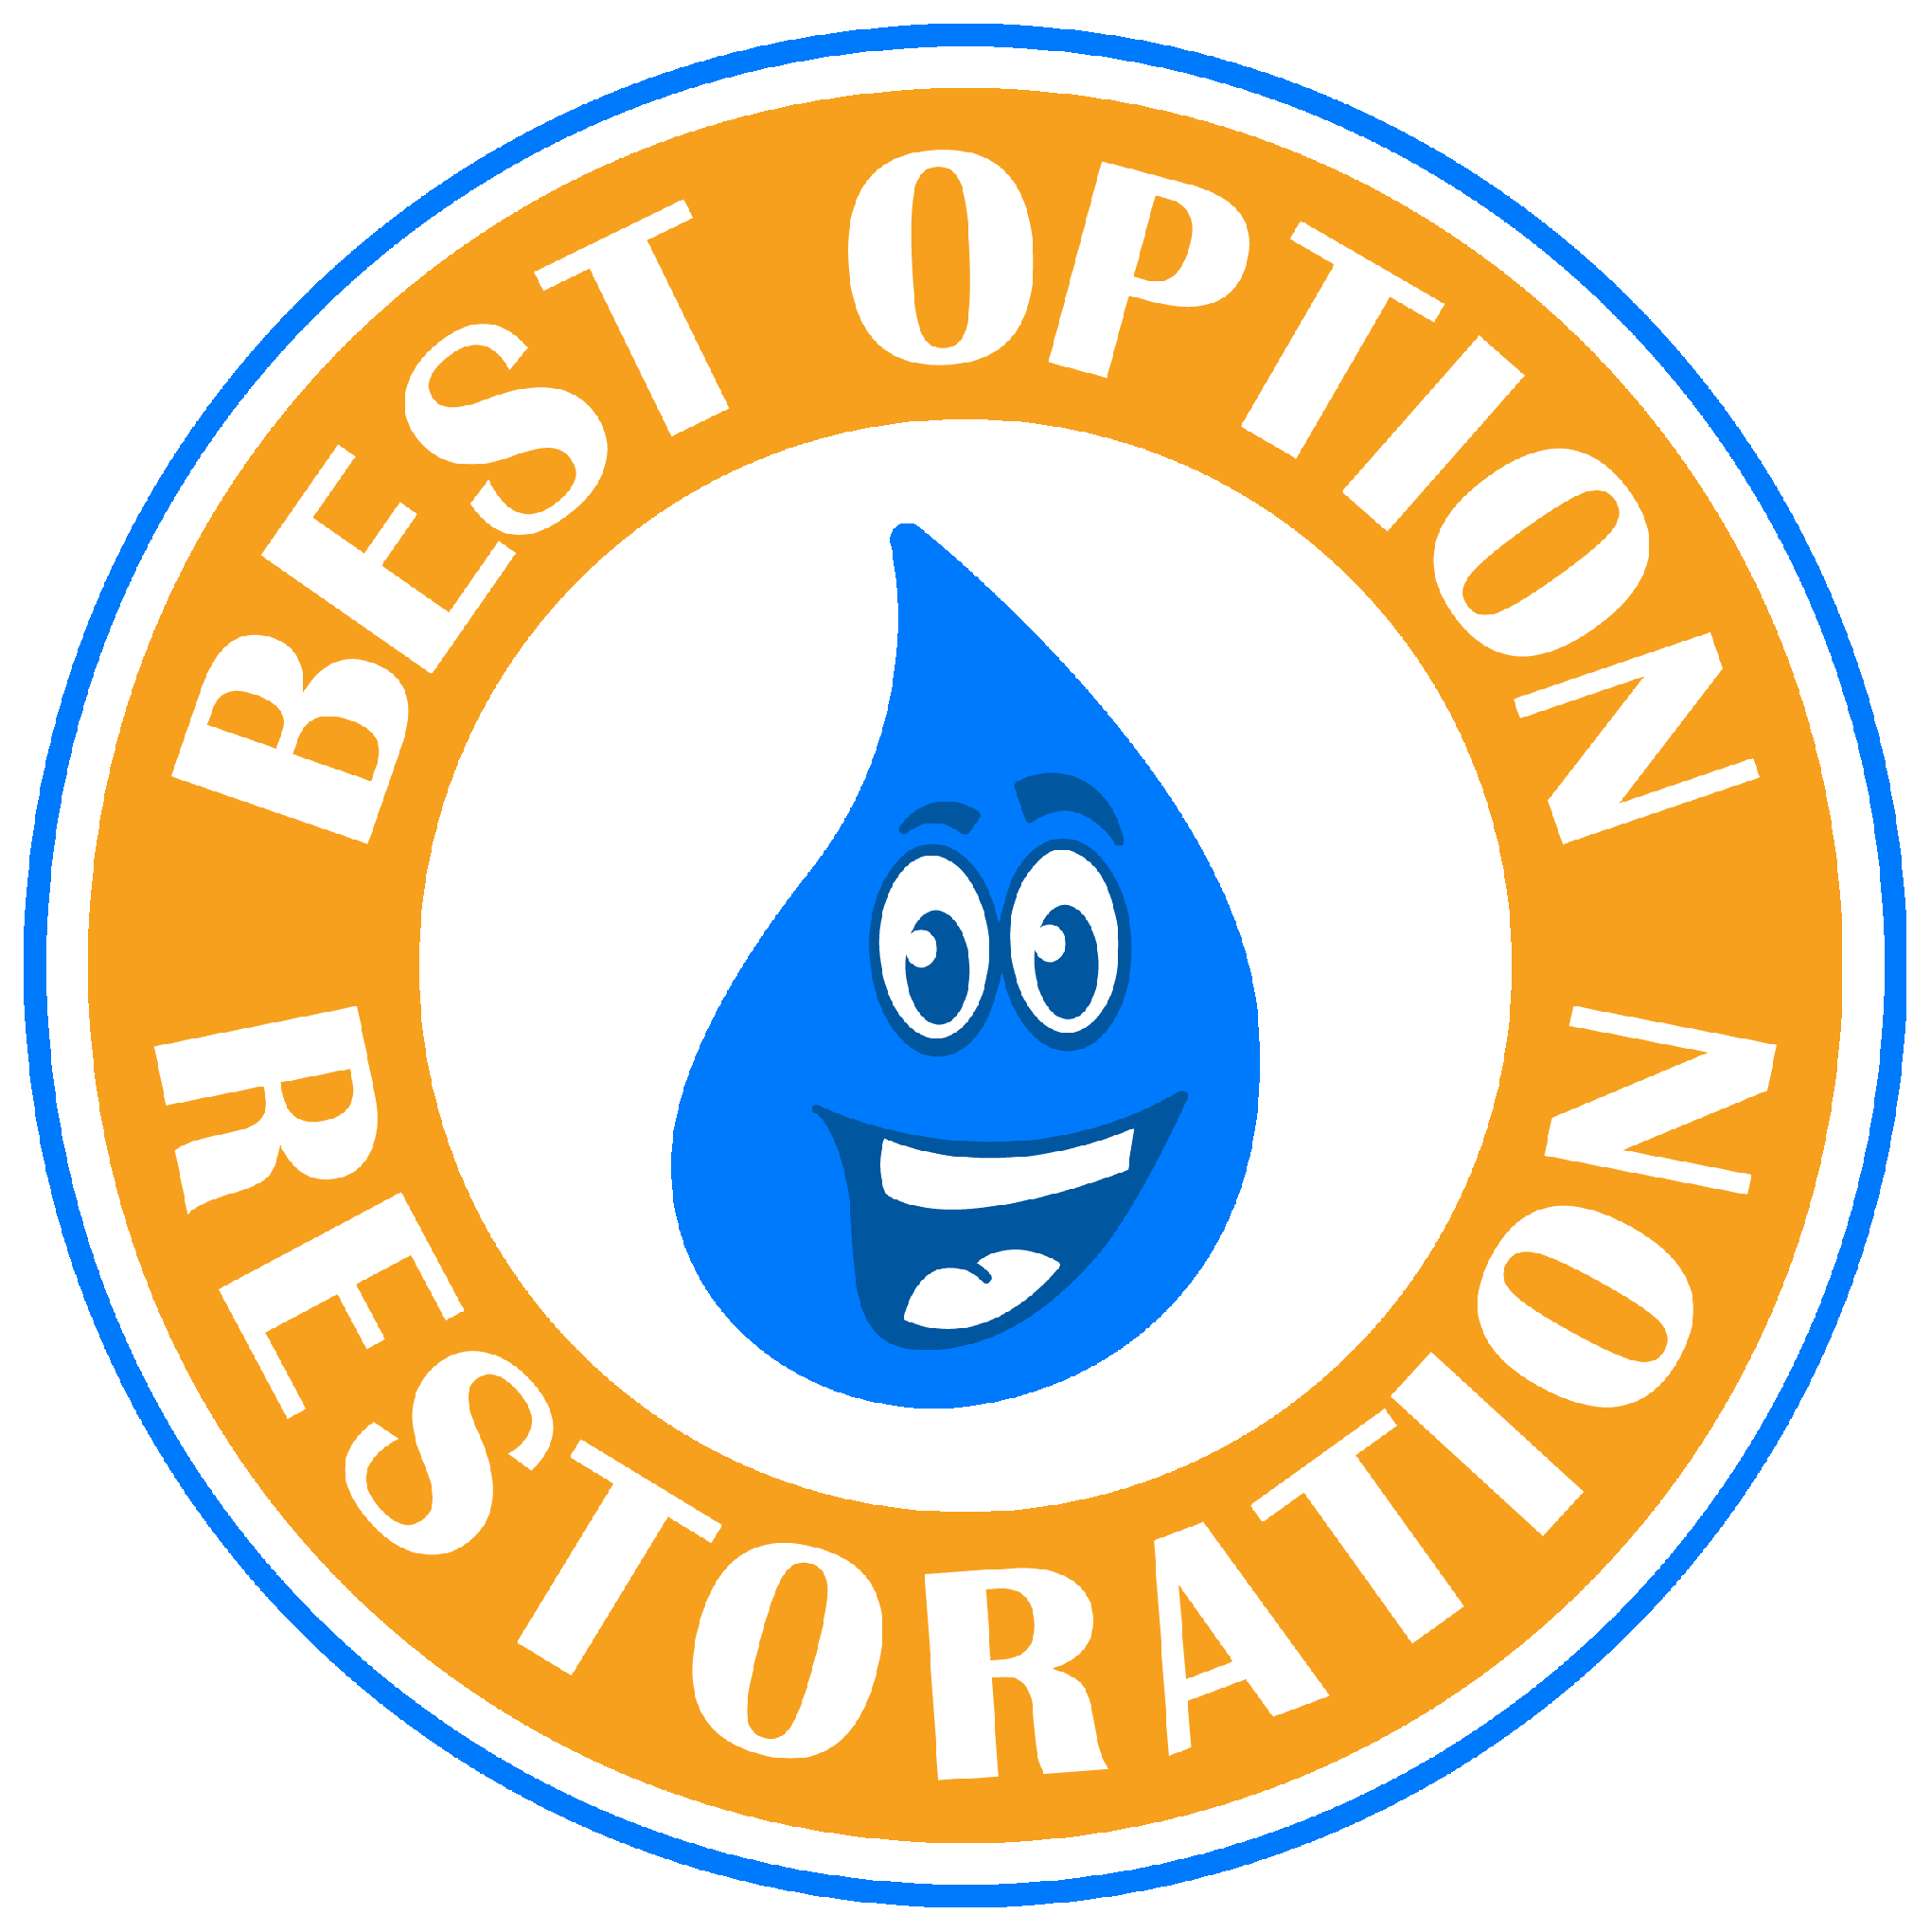 Emergency Restoration and Cleanup Services in East Louisville, KY